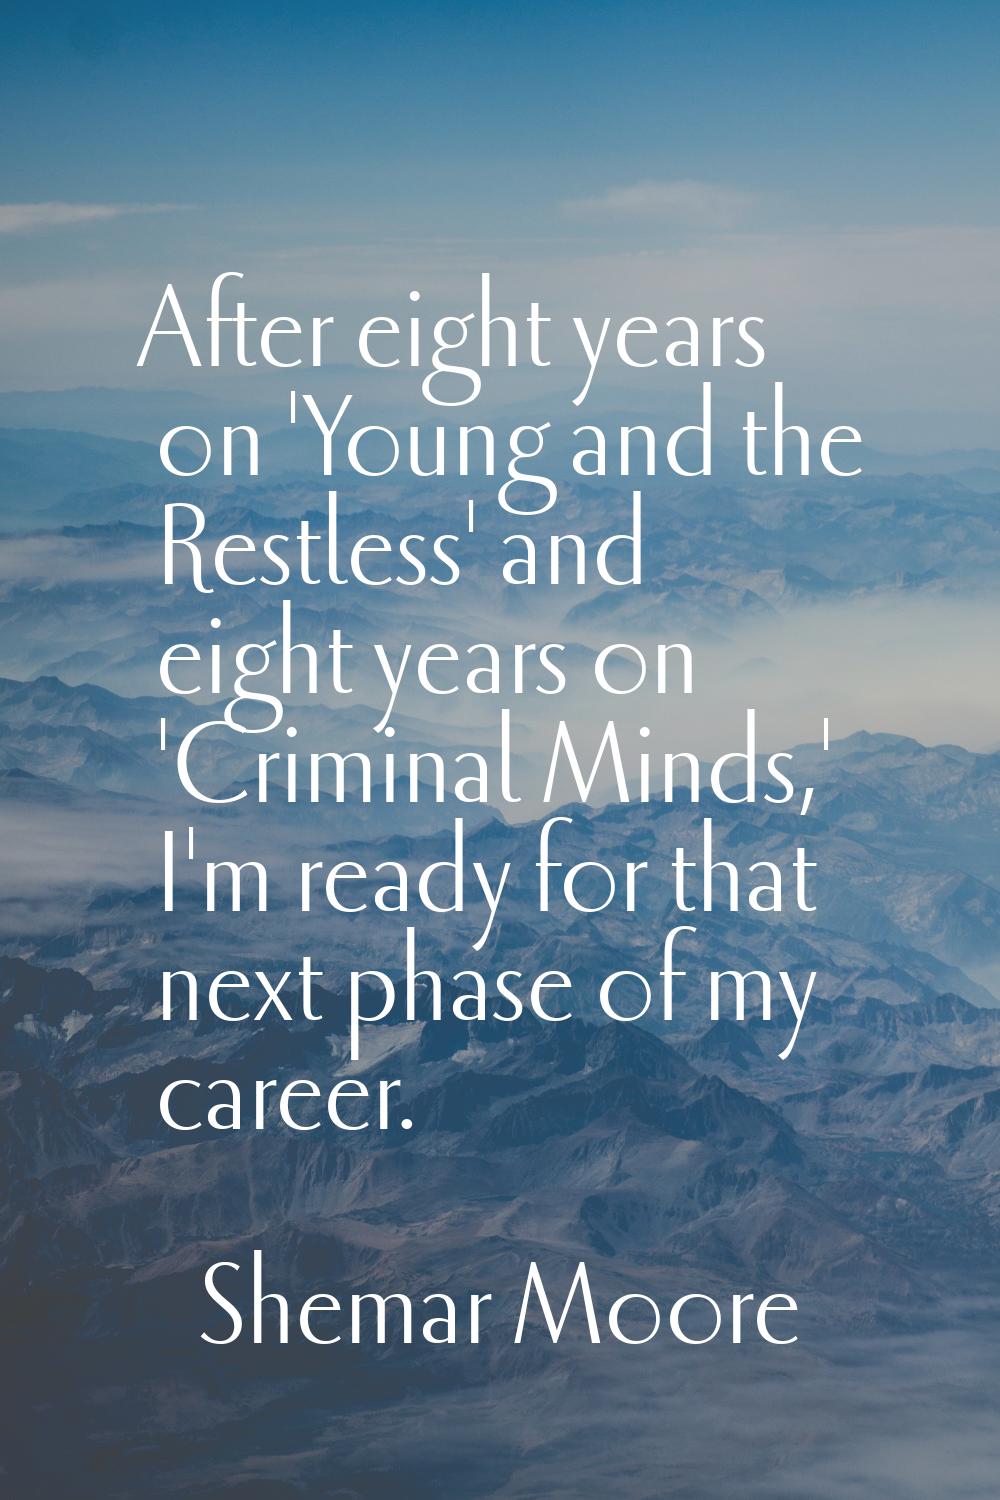 After eight years on 'Young and the Restless' and eight years on 'Criminal Minds,' I'm ready for th